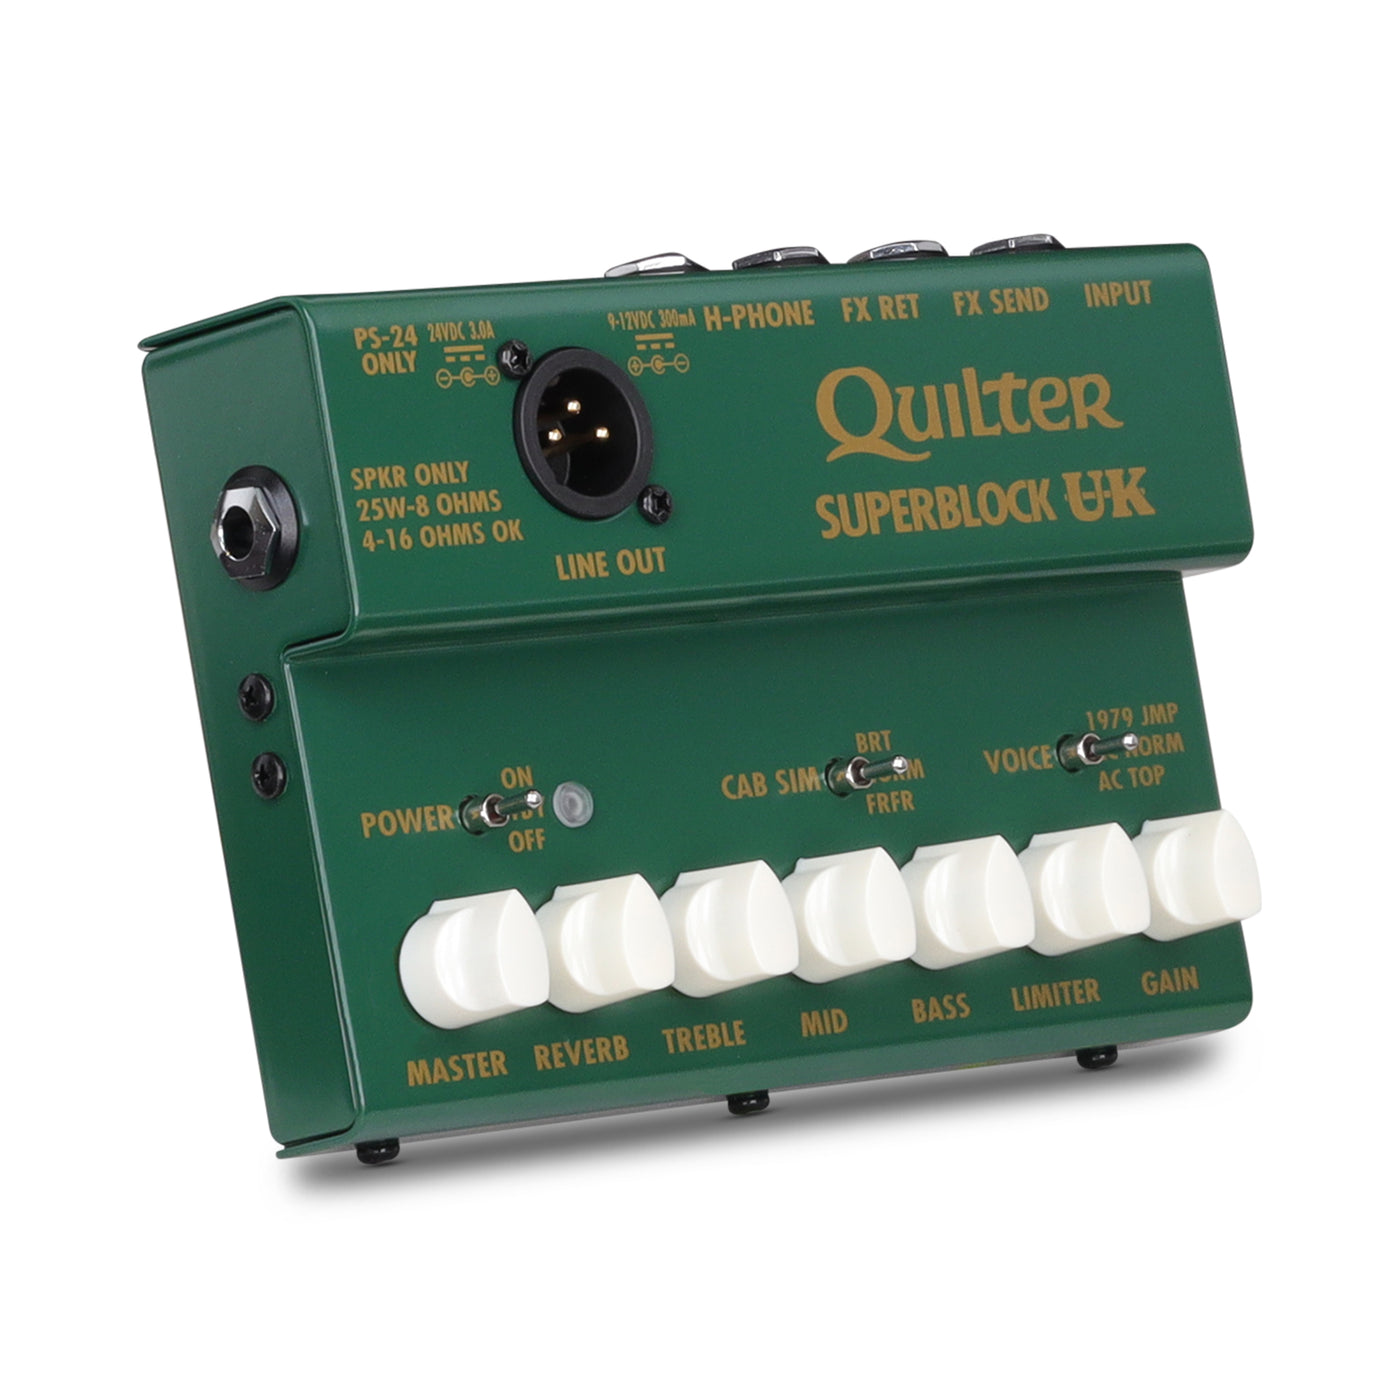 Quilter Labs SuperBlock UK Guitar Amplifier Head facing diagonally to the right